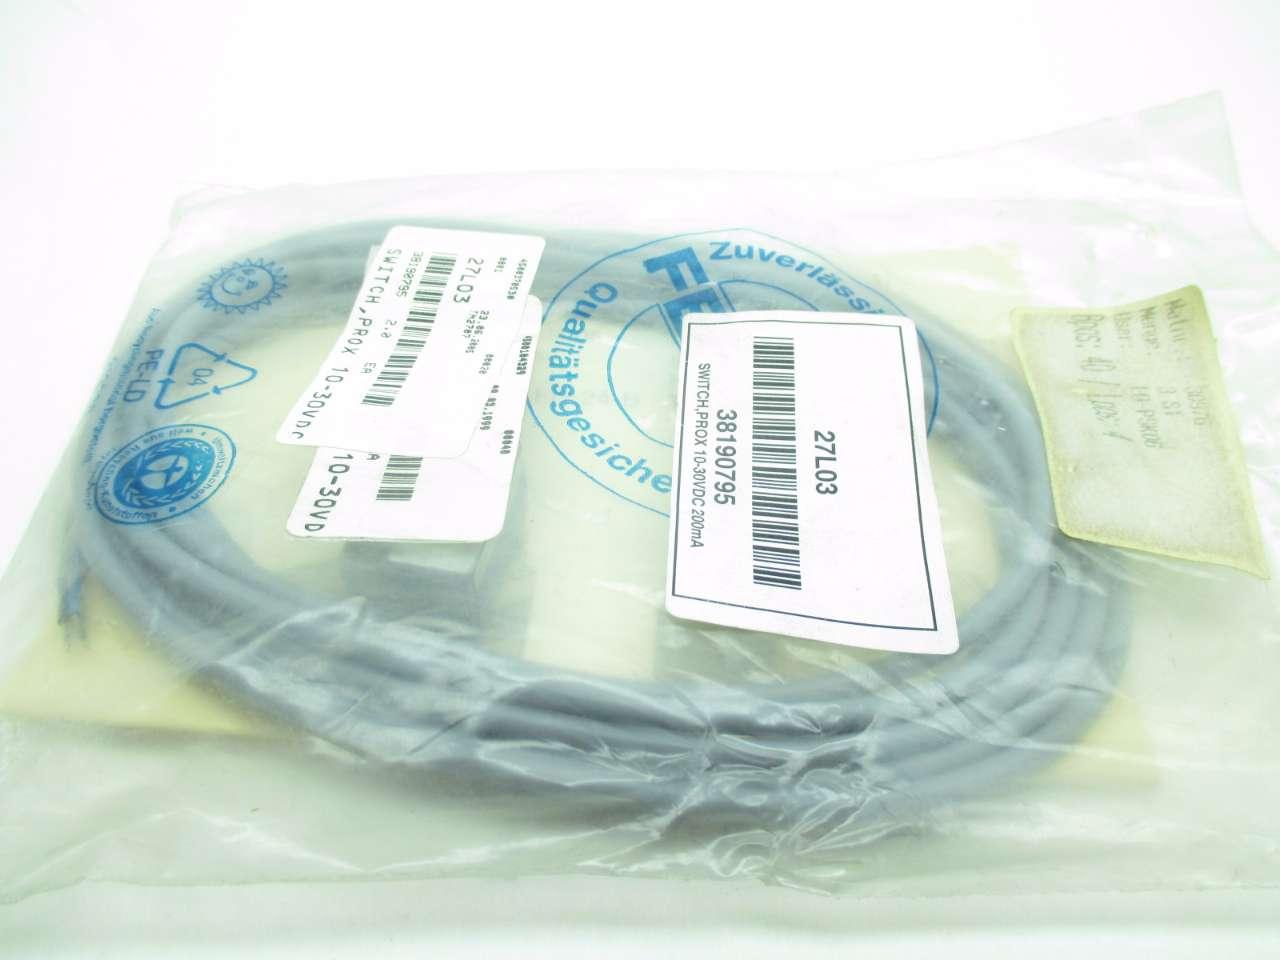 NEW IN FACTORY PACKAGE FESTO SMT-3-PS-KL-LED-24 PROXIMITY SWITCH P/N 30976 